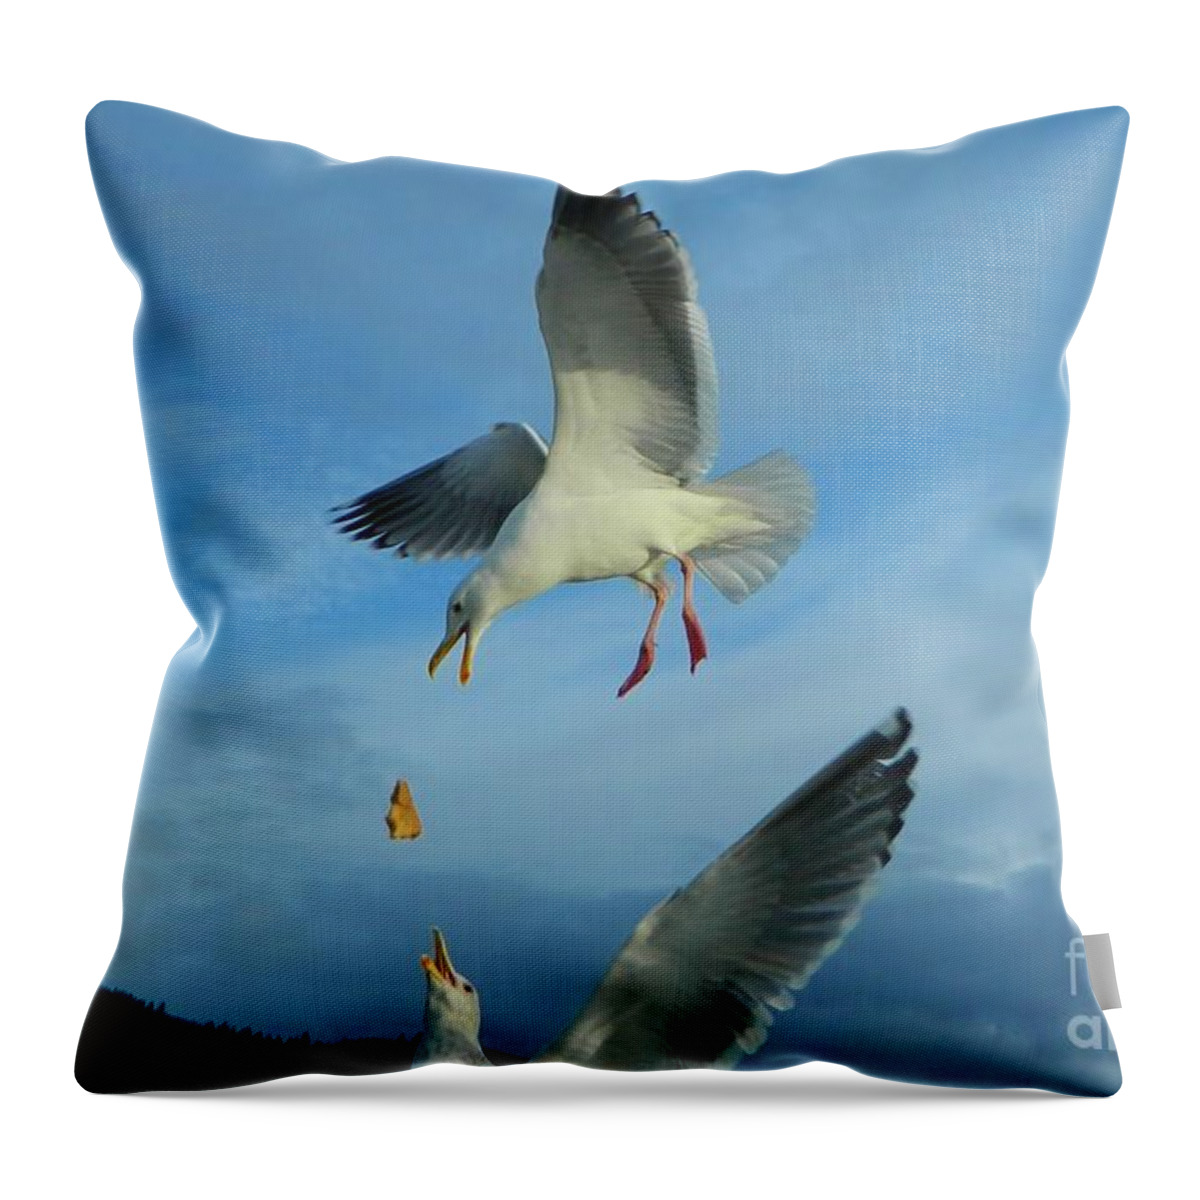 Seagulls Throw Pillow featuring the photograph Amazing by Gallery Of Hope 